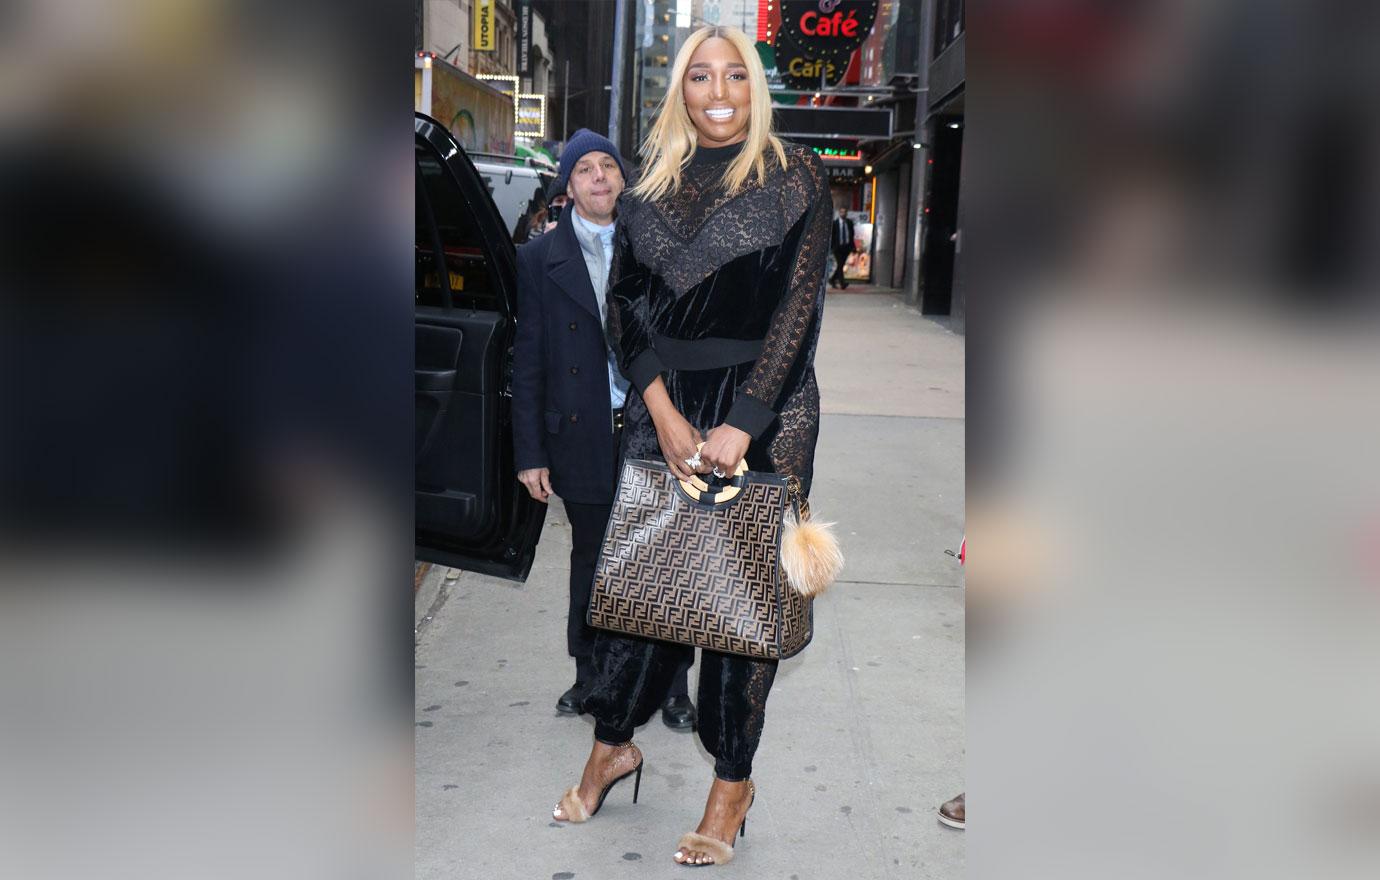 Nene Leakes Dines in NYC with Hermes and a Fellow Housewife - PurseBlog